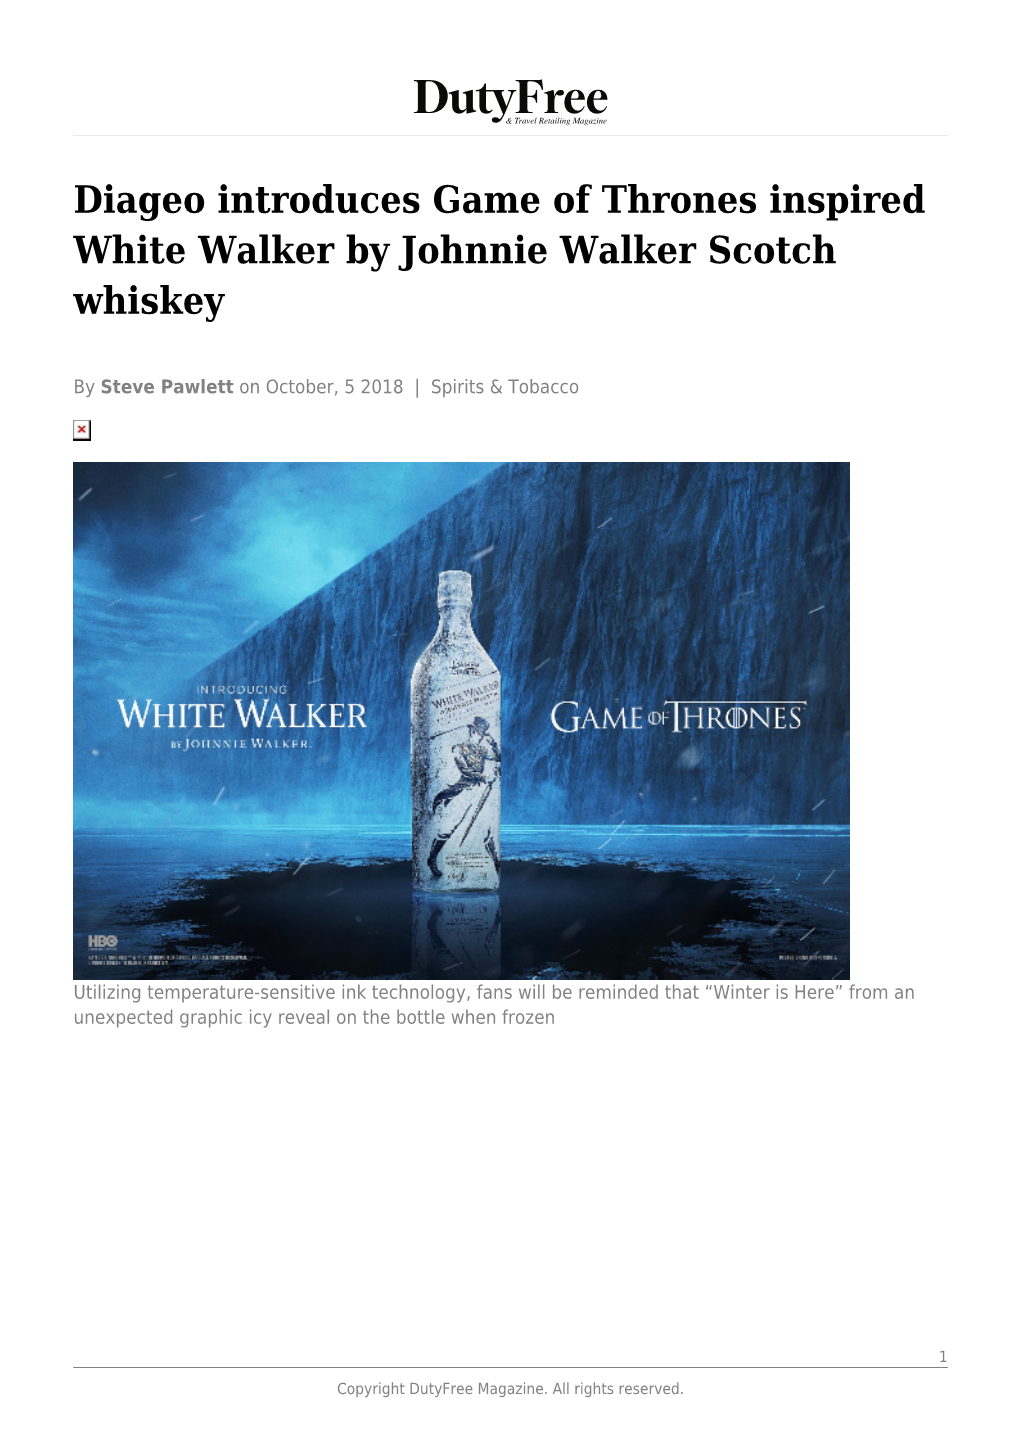 Diageo Introduces Game of Thrones Inspired White Walker by Johnnie Walker Scotch Whiskey